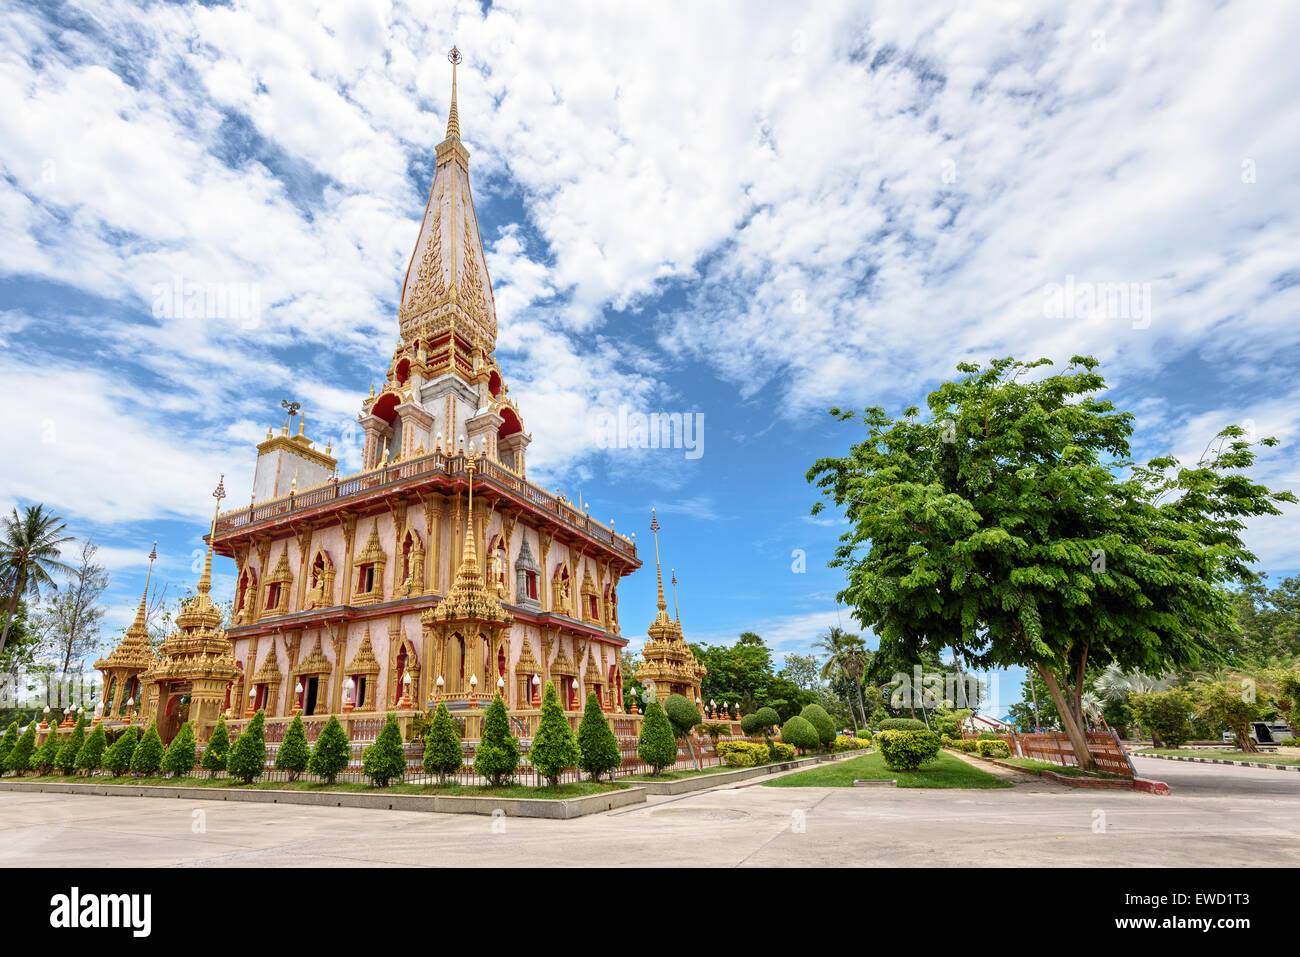 Beautiful pagoda at Wat Chalong or Wat Chaitararam Temple famous attractions and place of worship in Phuket Province, Thailand Stock Photo